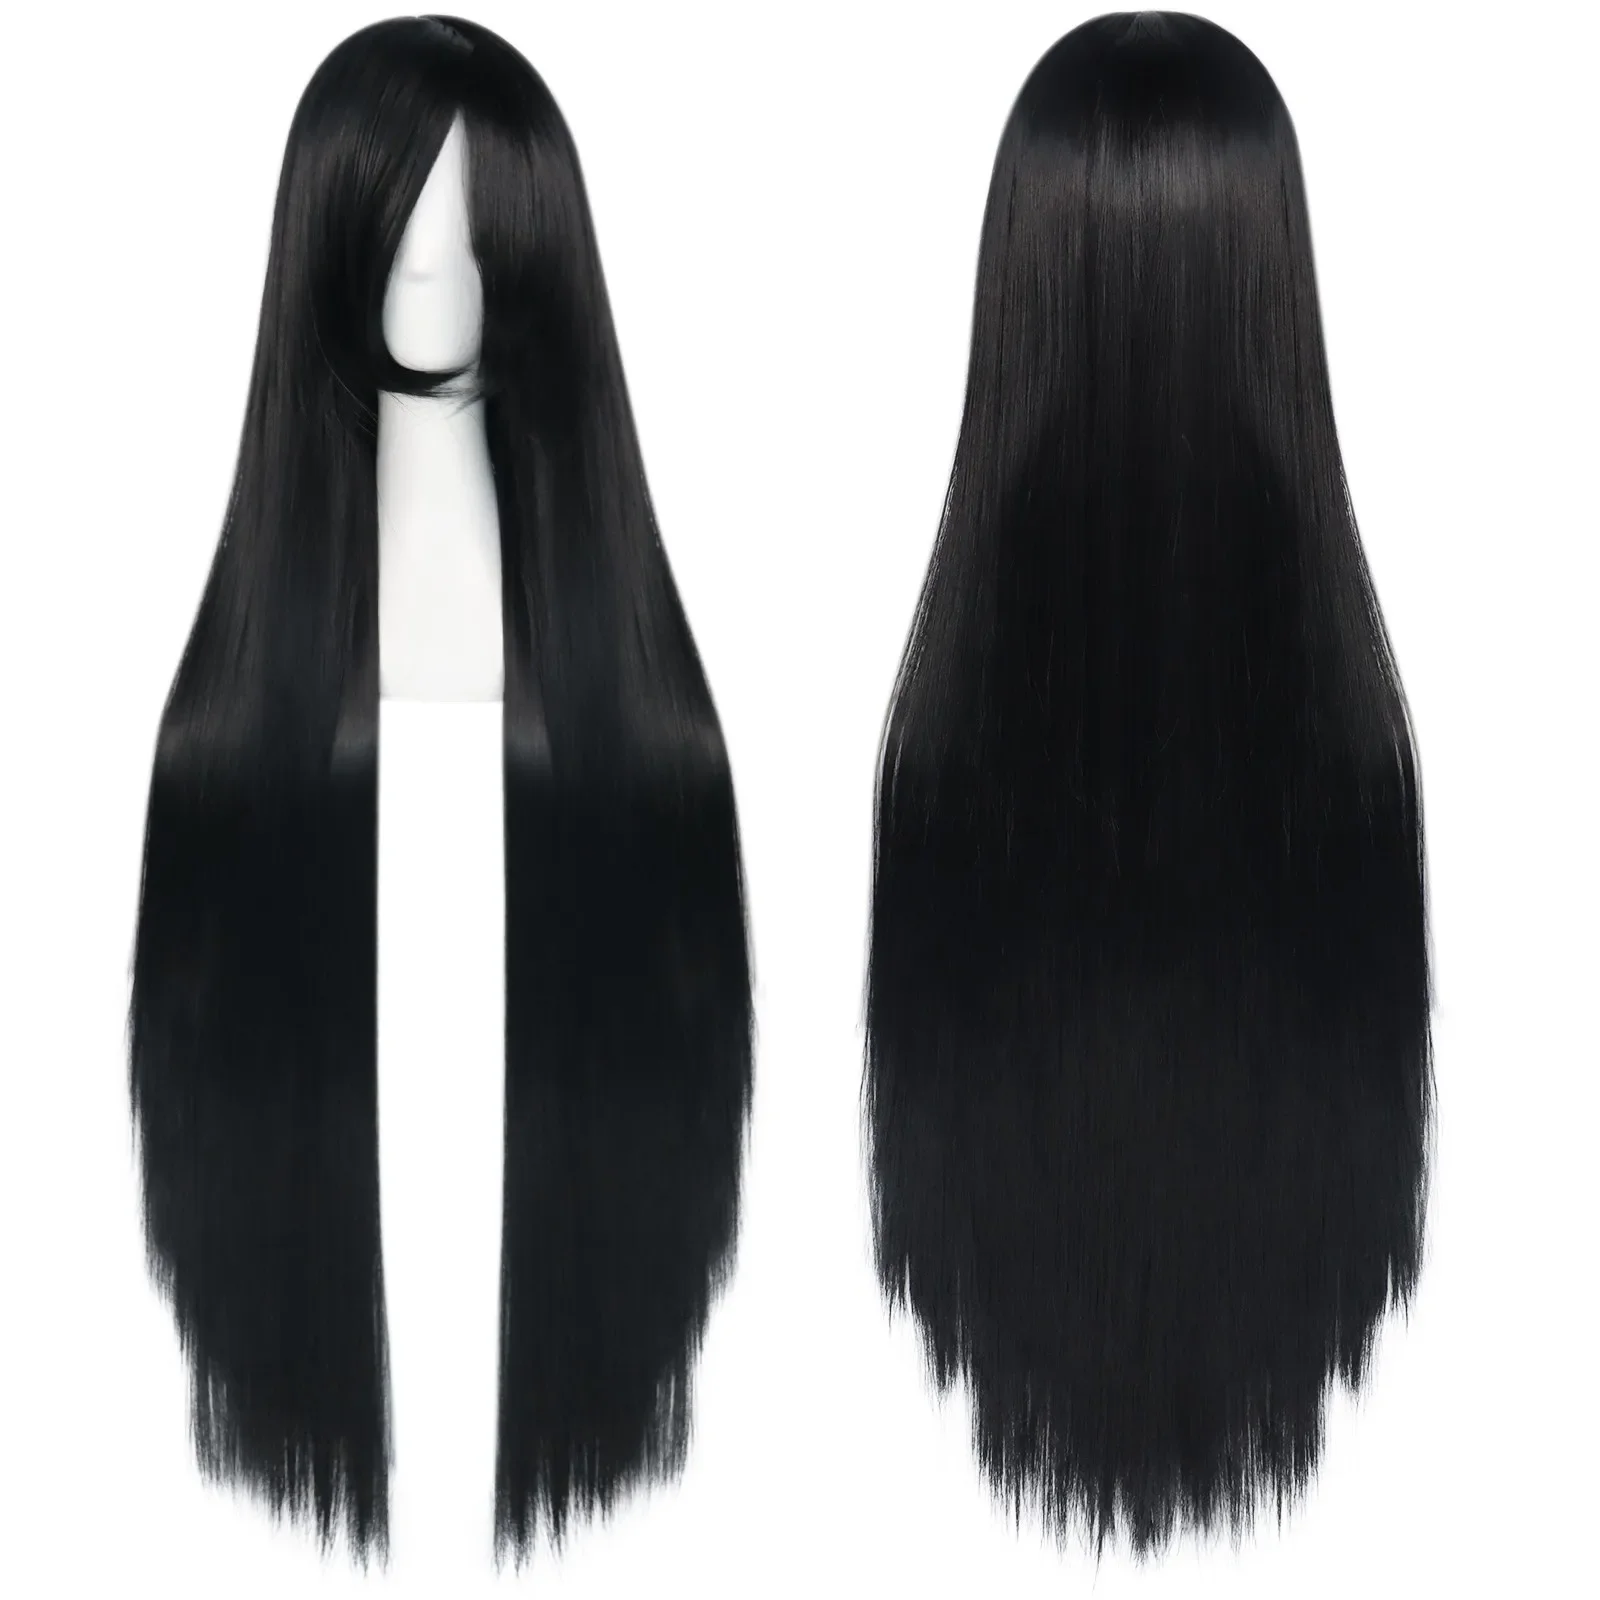 

38inch Synthetic Super Long Silky Straight Black Cosplay Wig with Bangs for Halloween &